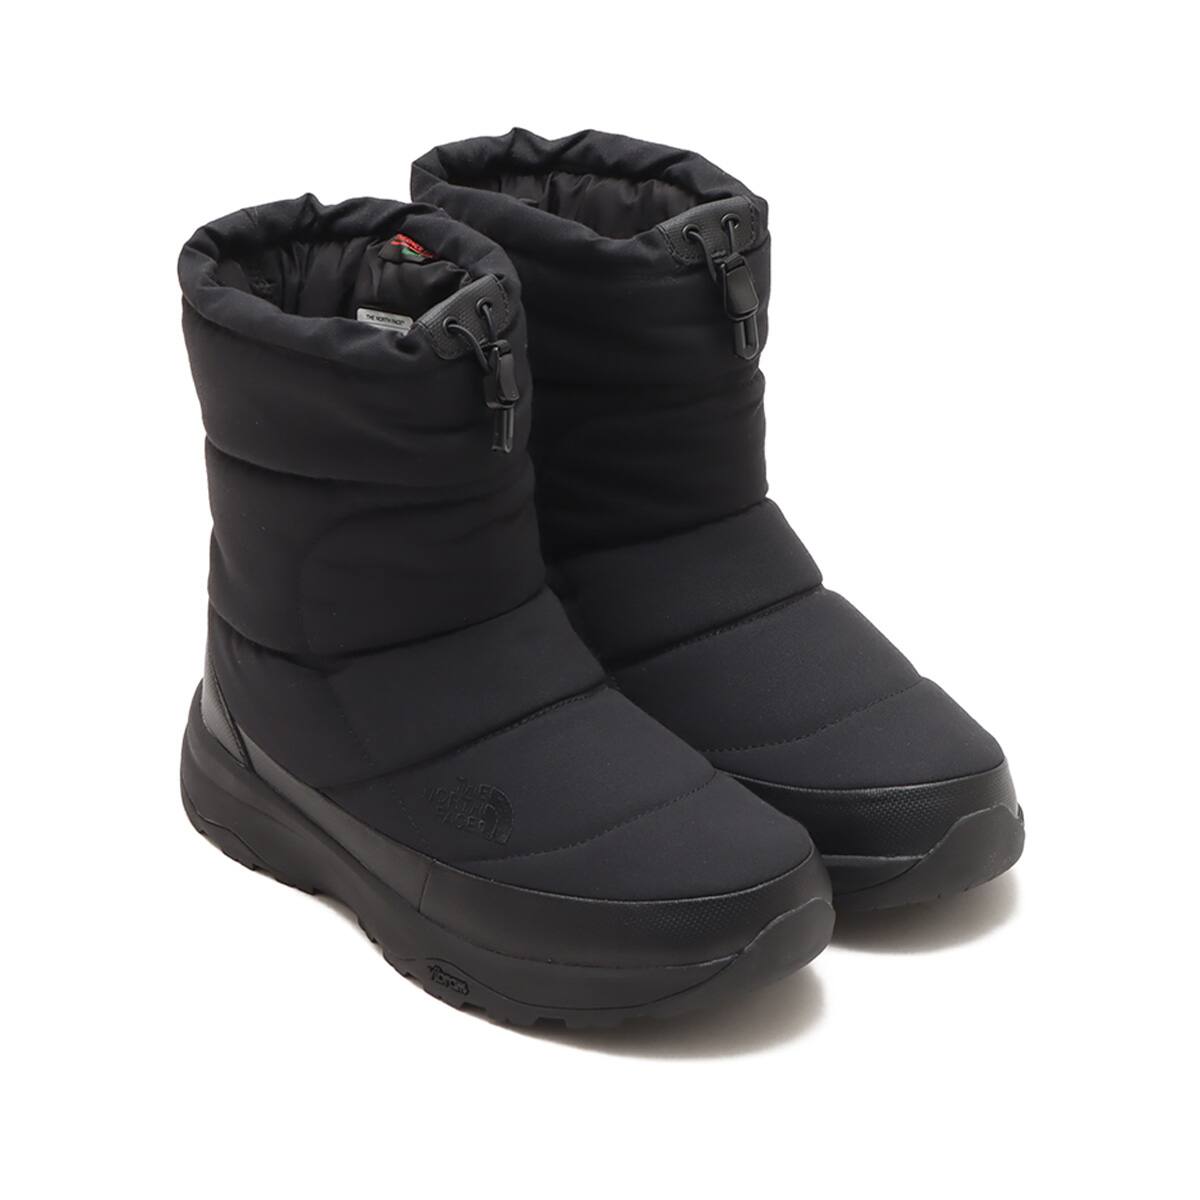 THE NORTH FACE NUPTSE BOOTIE NF51874 23